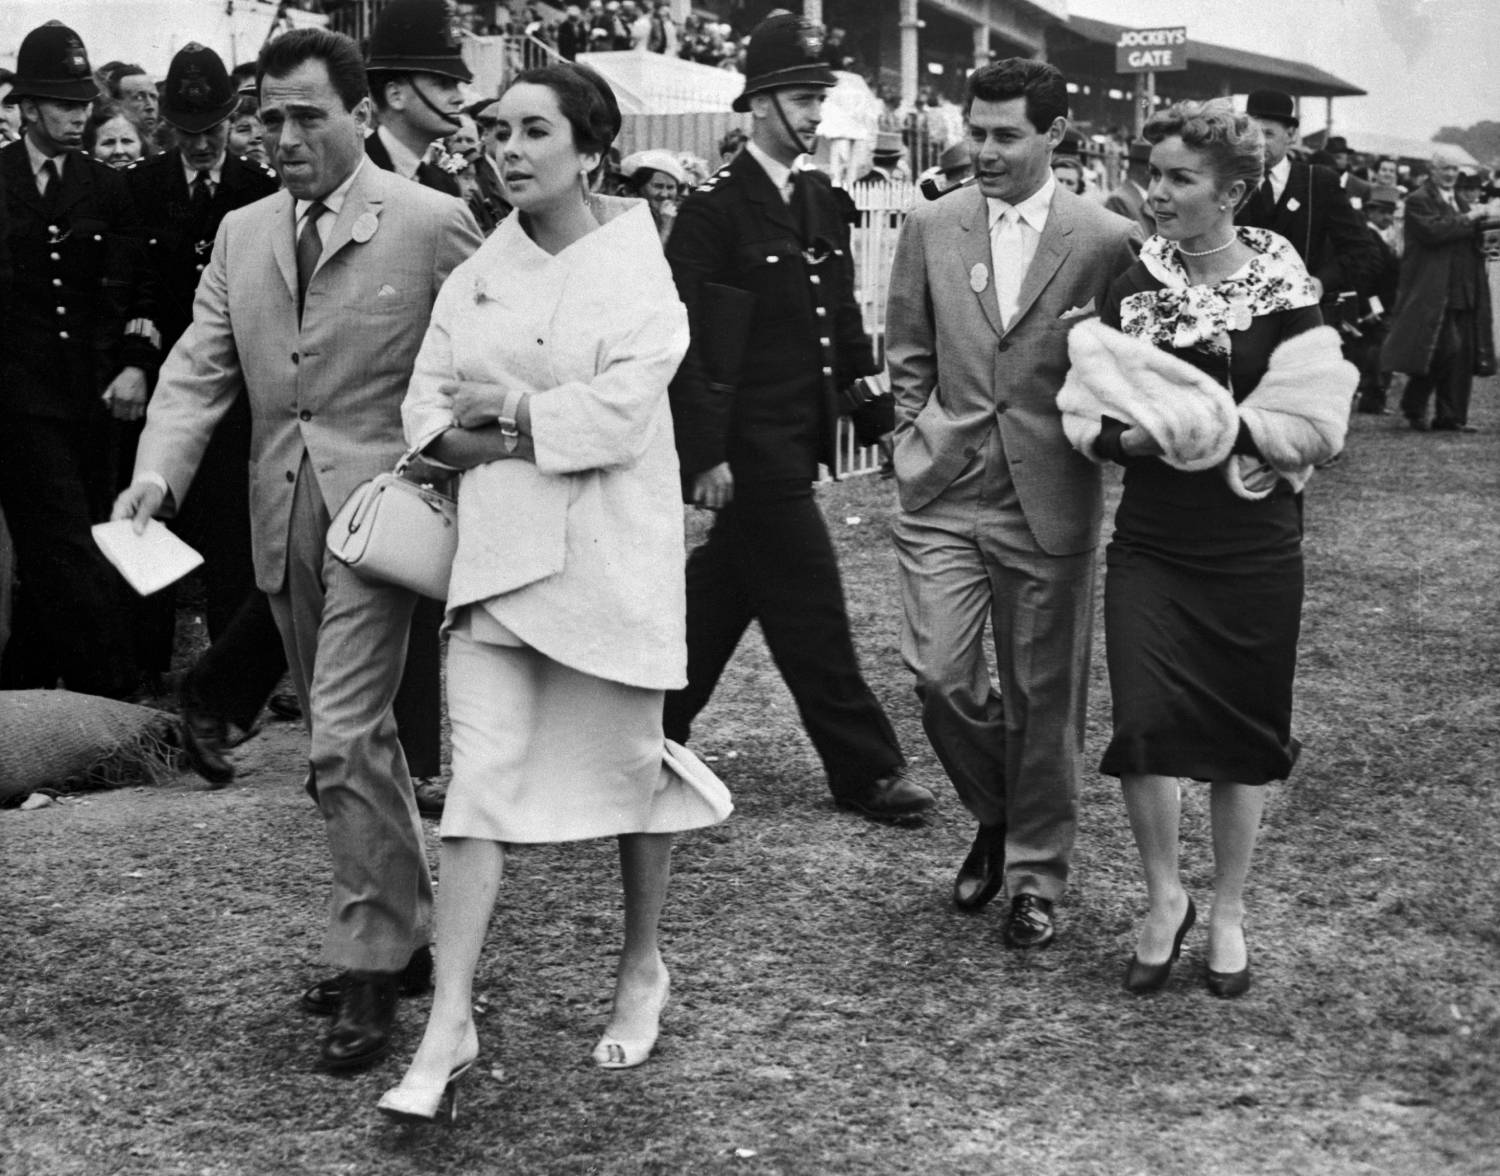 Actress elizabeth Taylor, who nearly died of pneumonia less than a year ago, was hospitalized late 2/17 with a throat hemorrhage, according to unconfirmed reports. In this June 5, 1957 photo, miss Taylor is shown with late husband, Mike Todd(left) as they attended the running of the English Derby in Epsom. They are followed by singer, Eddie Fisher, and his wife, Debbie Reynolds.